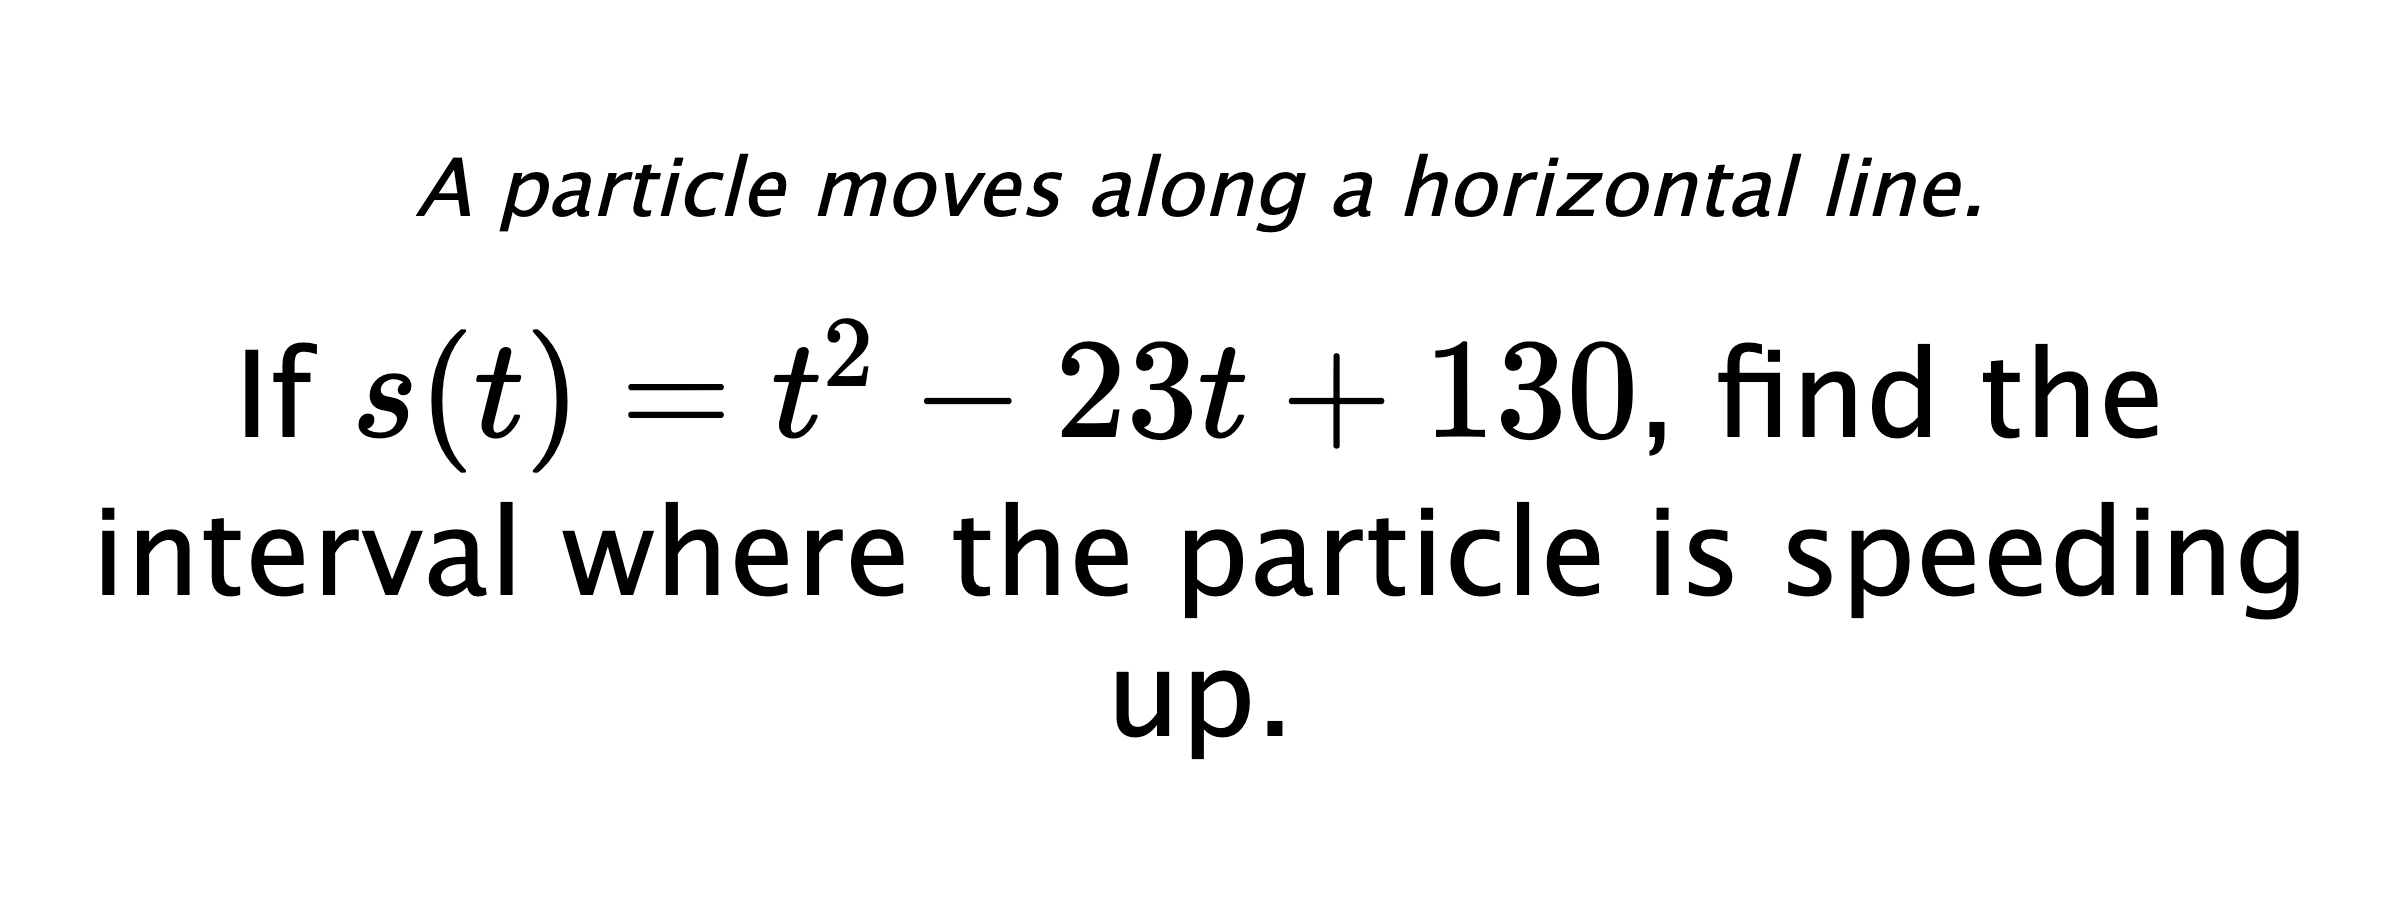 A particle moves along a horizontal line. If $ s(t)=t^2-23t+130 $, find the interval where the particle is speeding up.